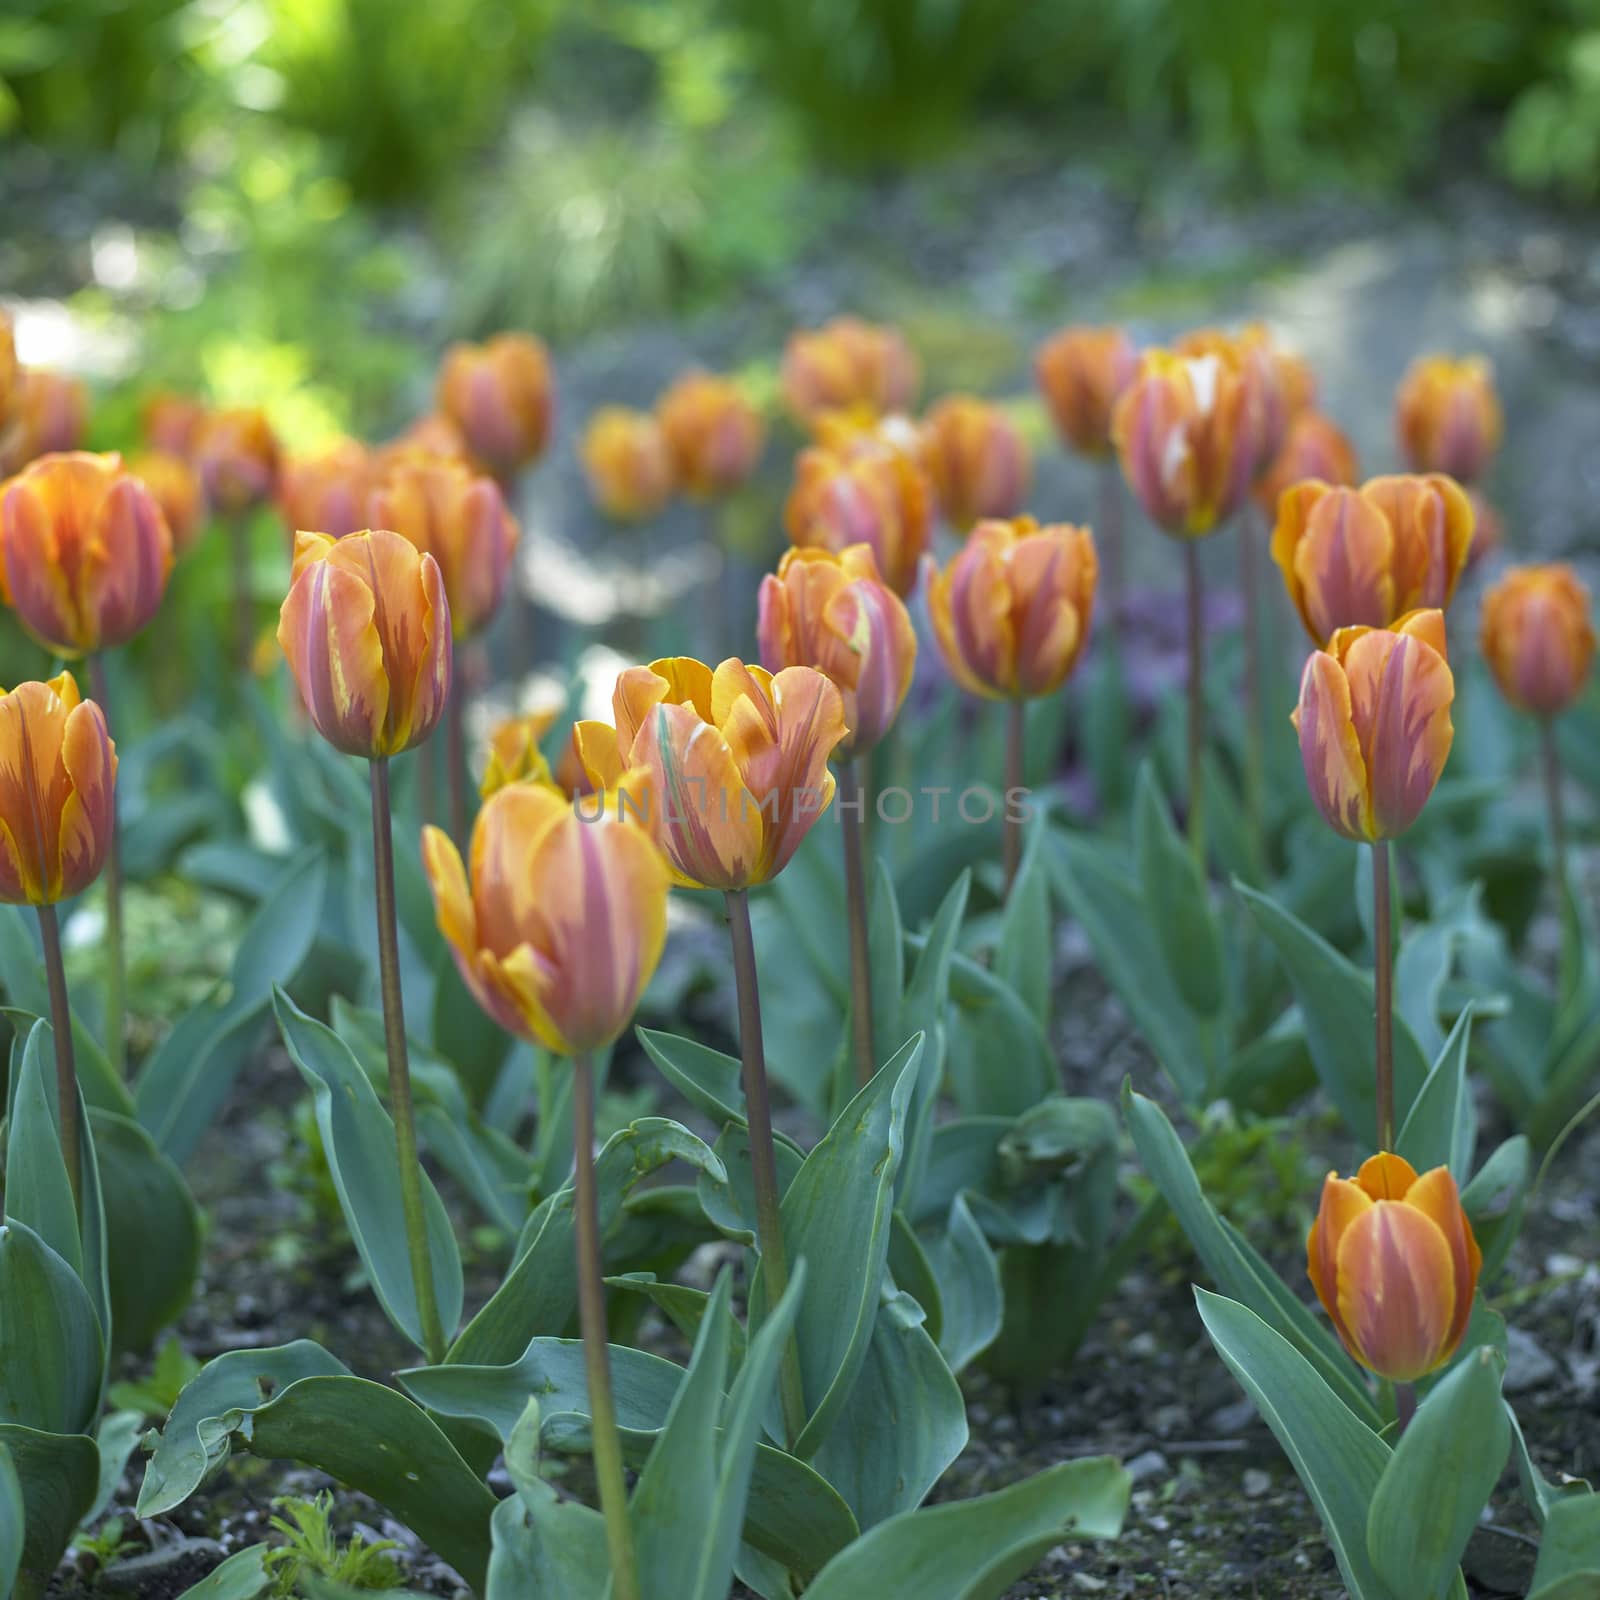 Yellow and pink tulips  and greenery in a natural garden